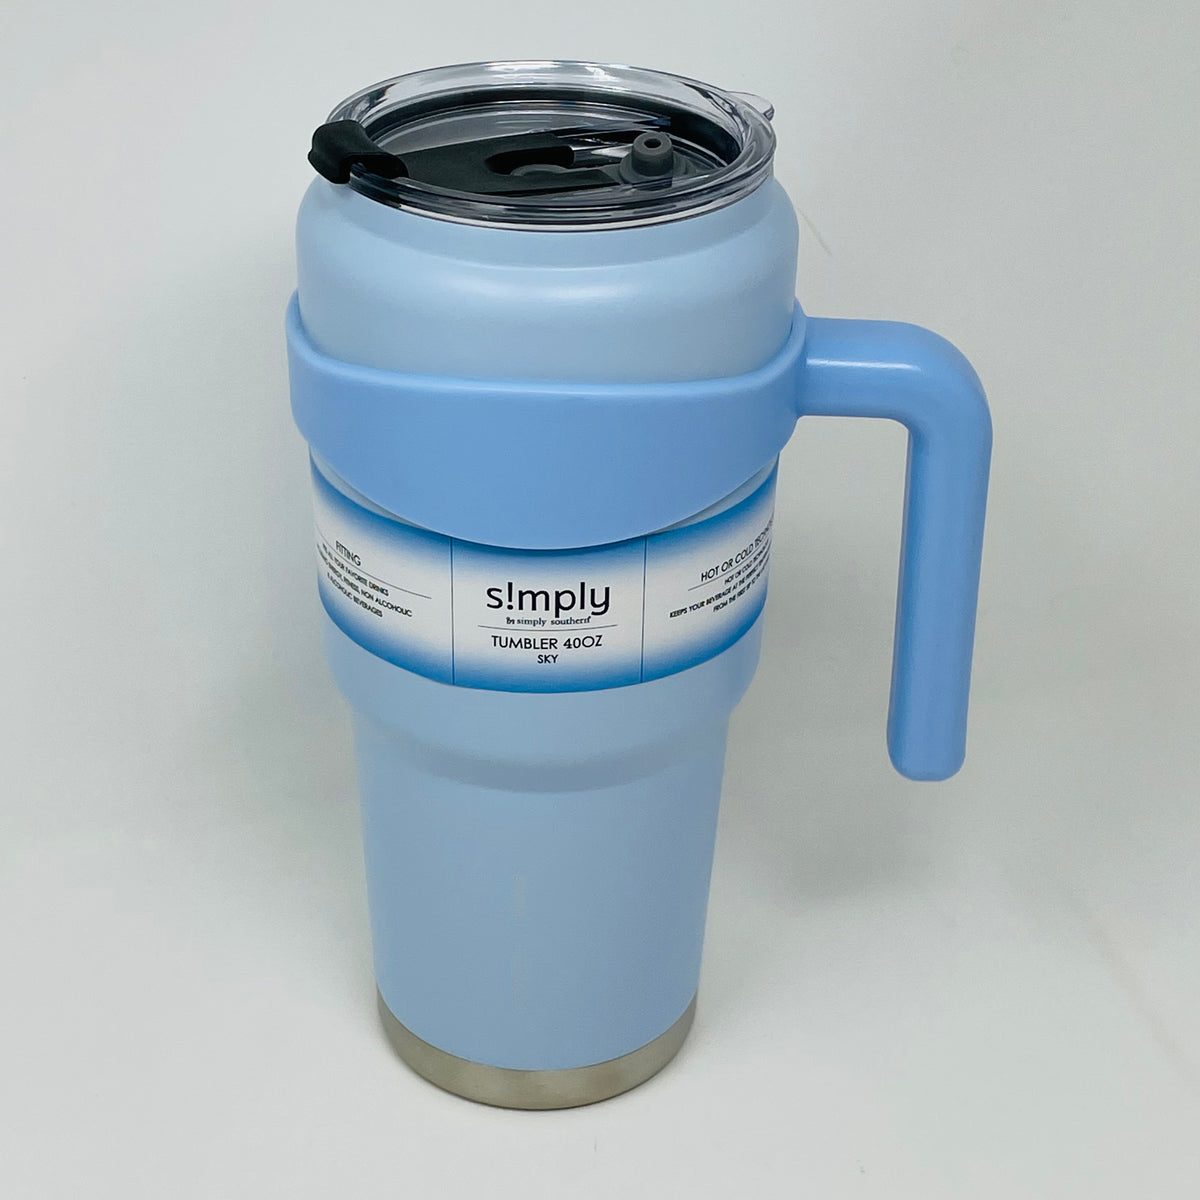 PREORDER: 40 oz Tumbler in Assorted Colors – Simplygingeraccessories